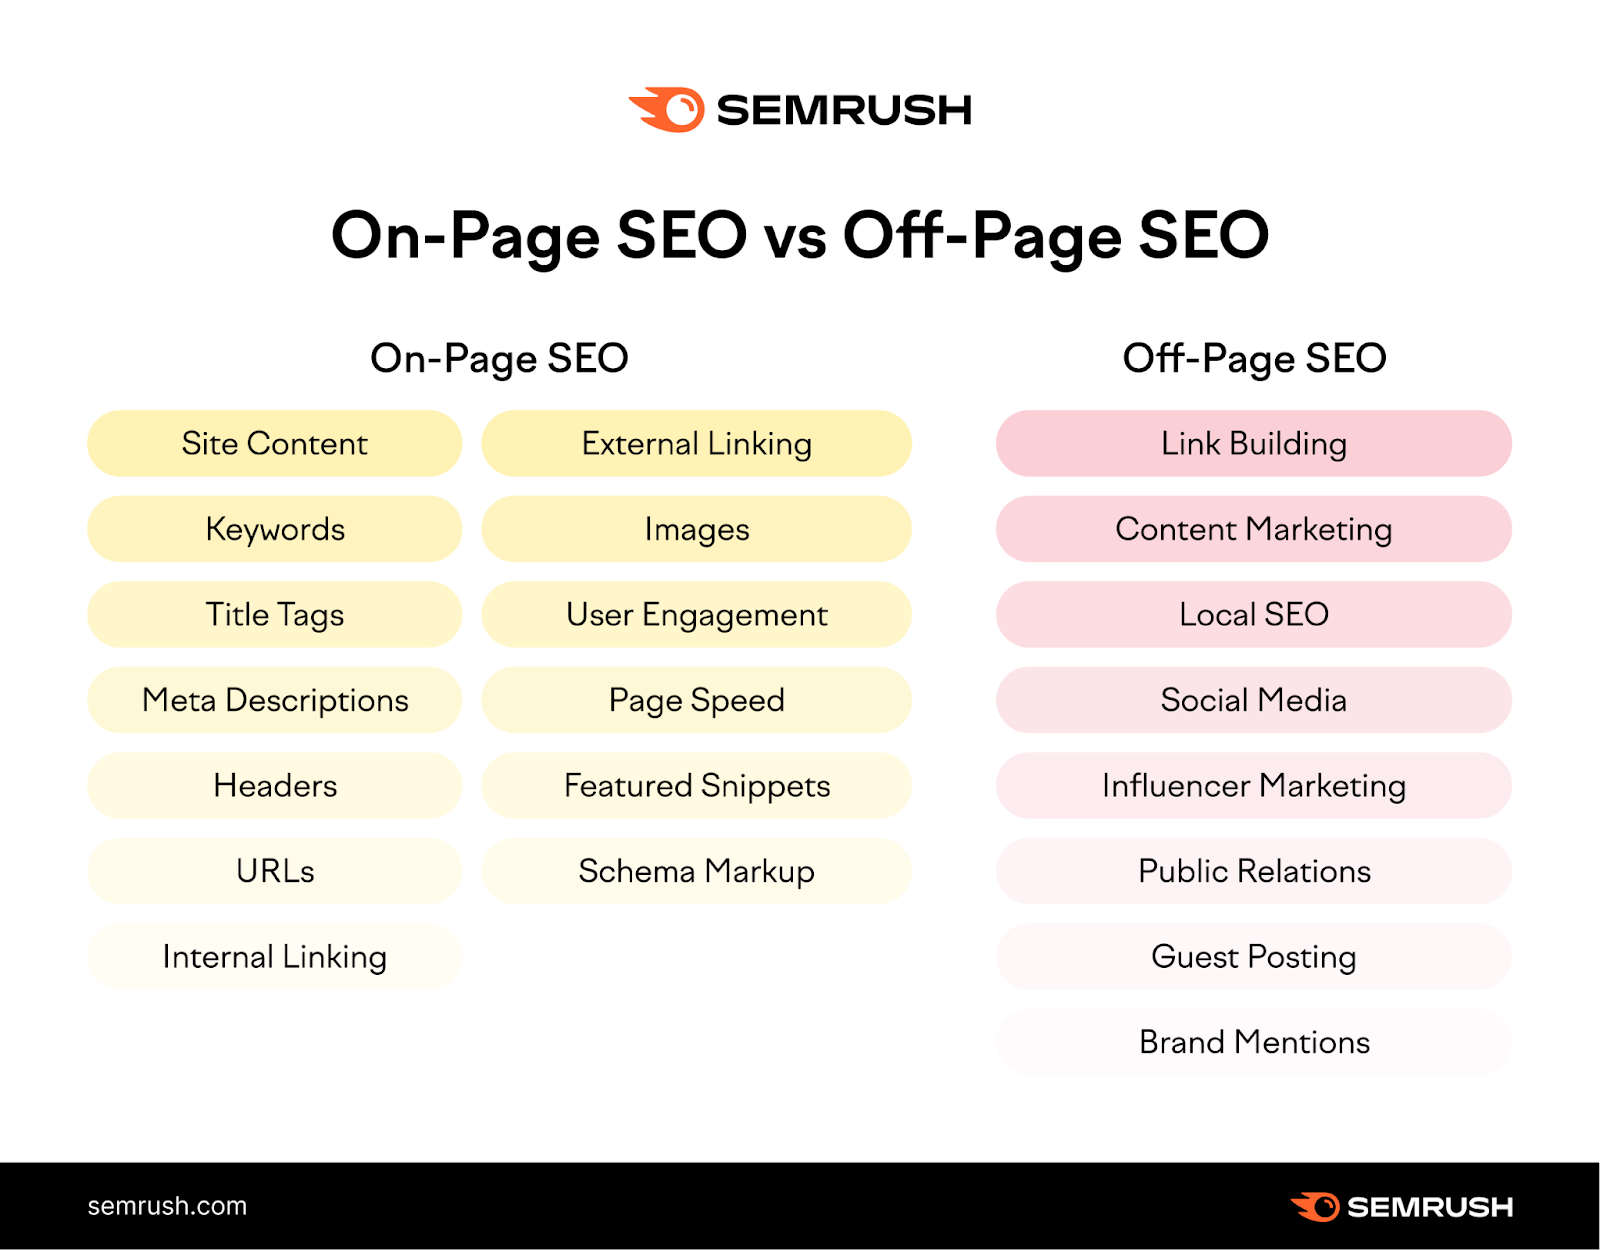 A comparison of On-Page and Off-Page SEO